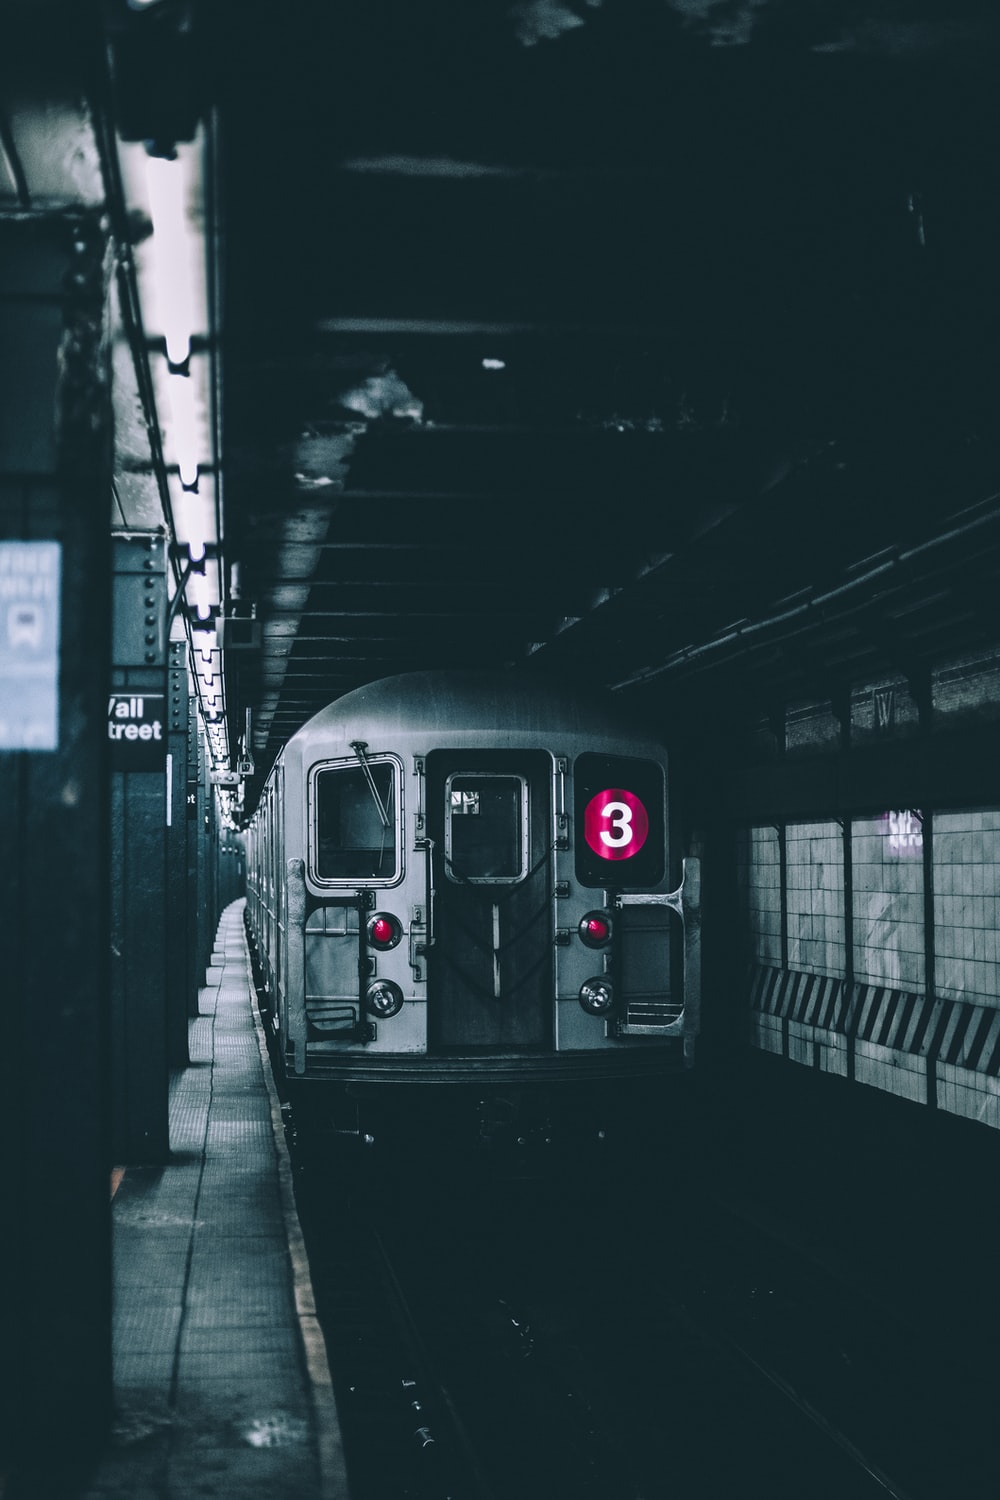 Subway Train Picture. Download Free Image